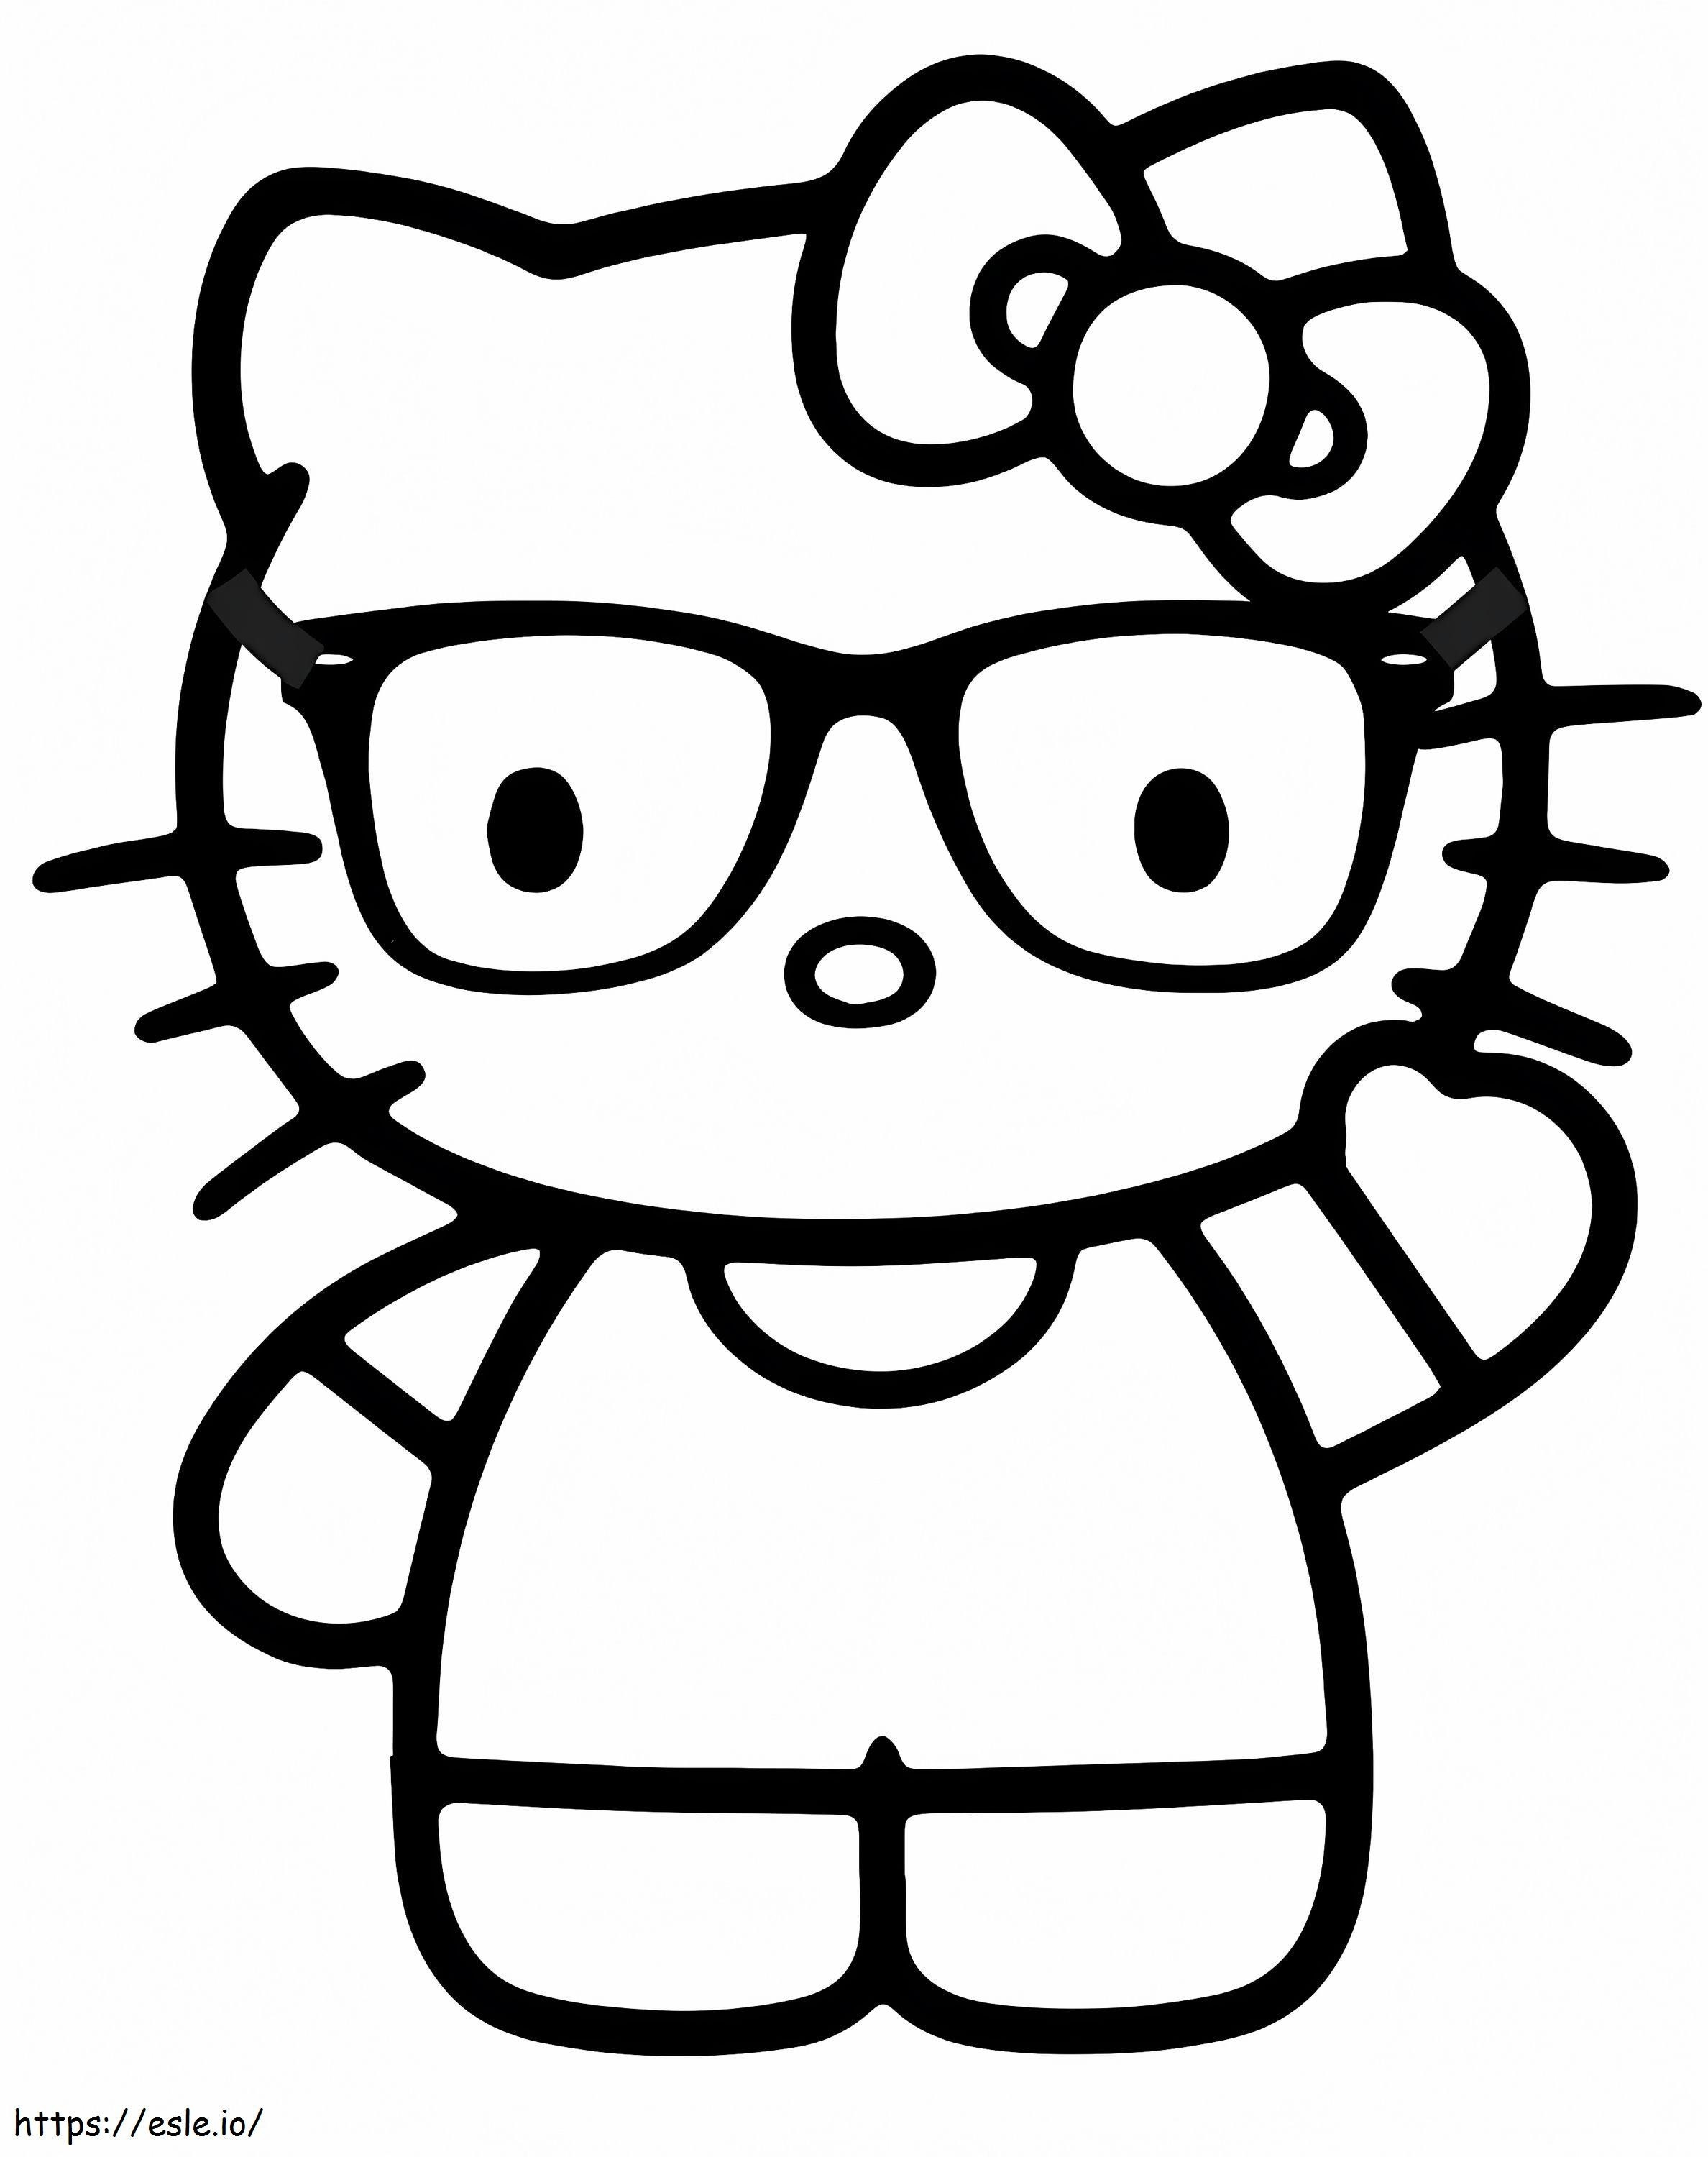 Nerd Hello Kitty coloring page